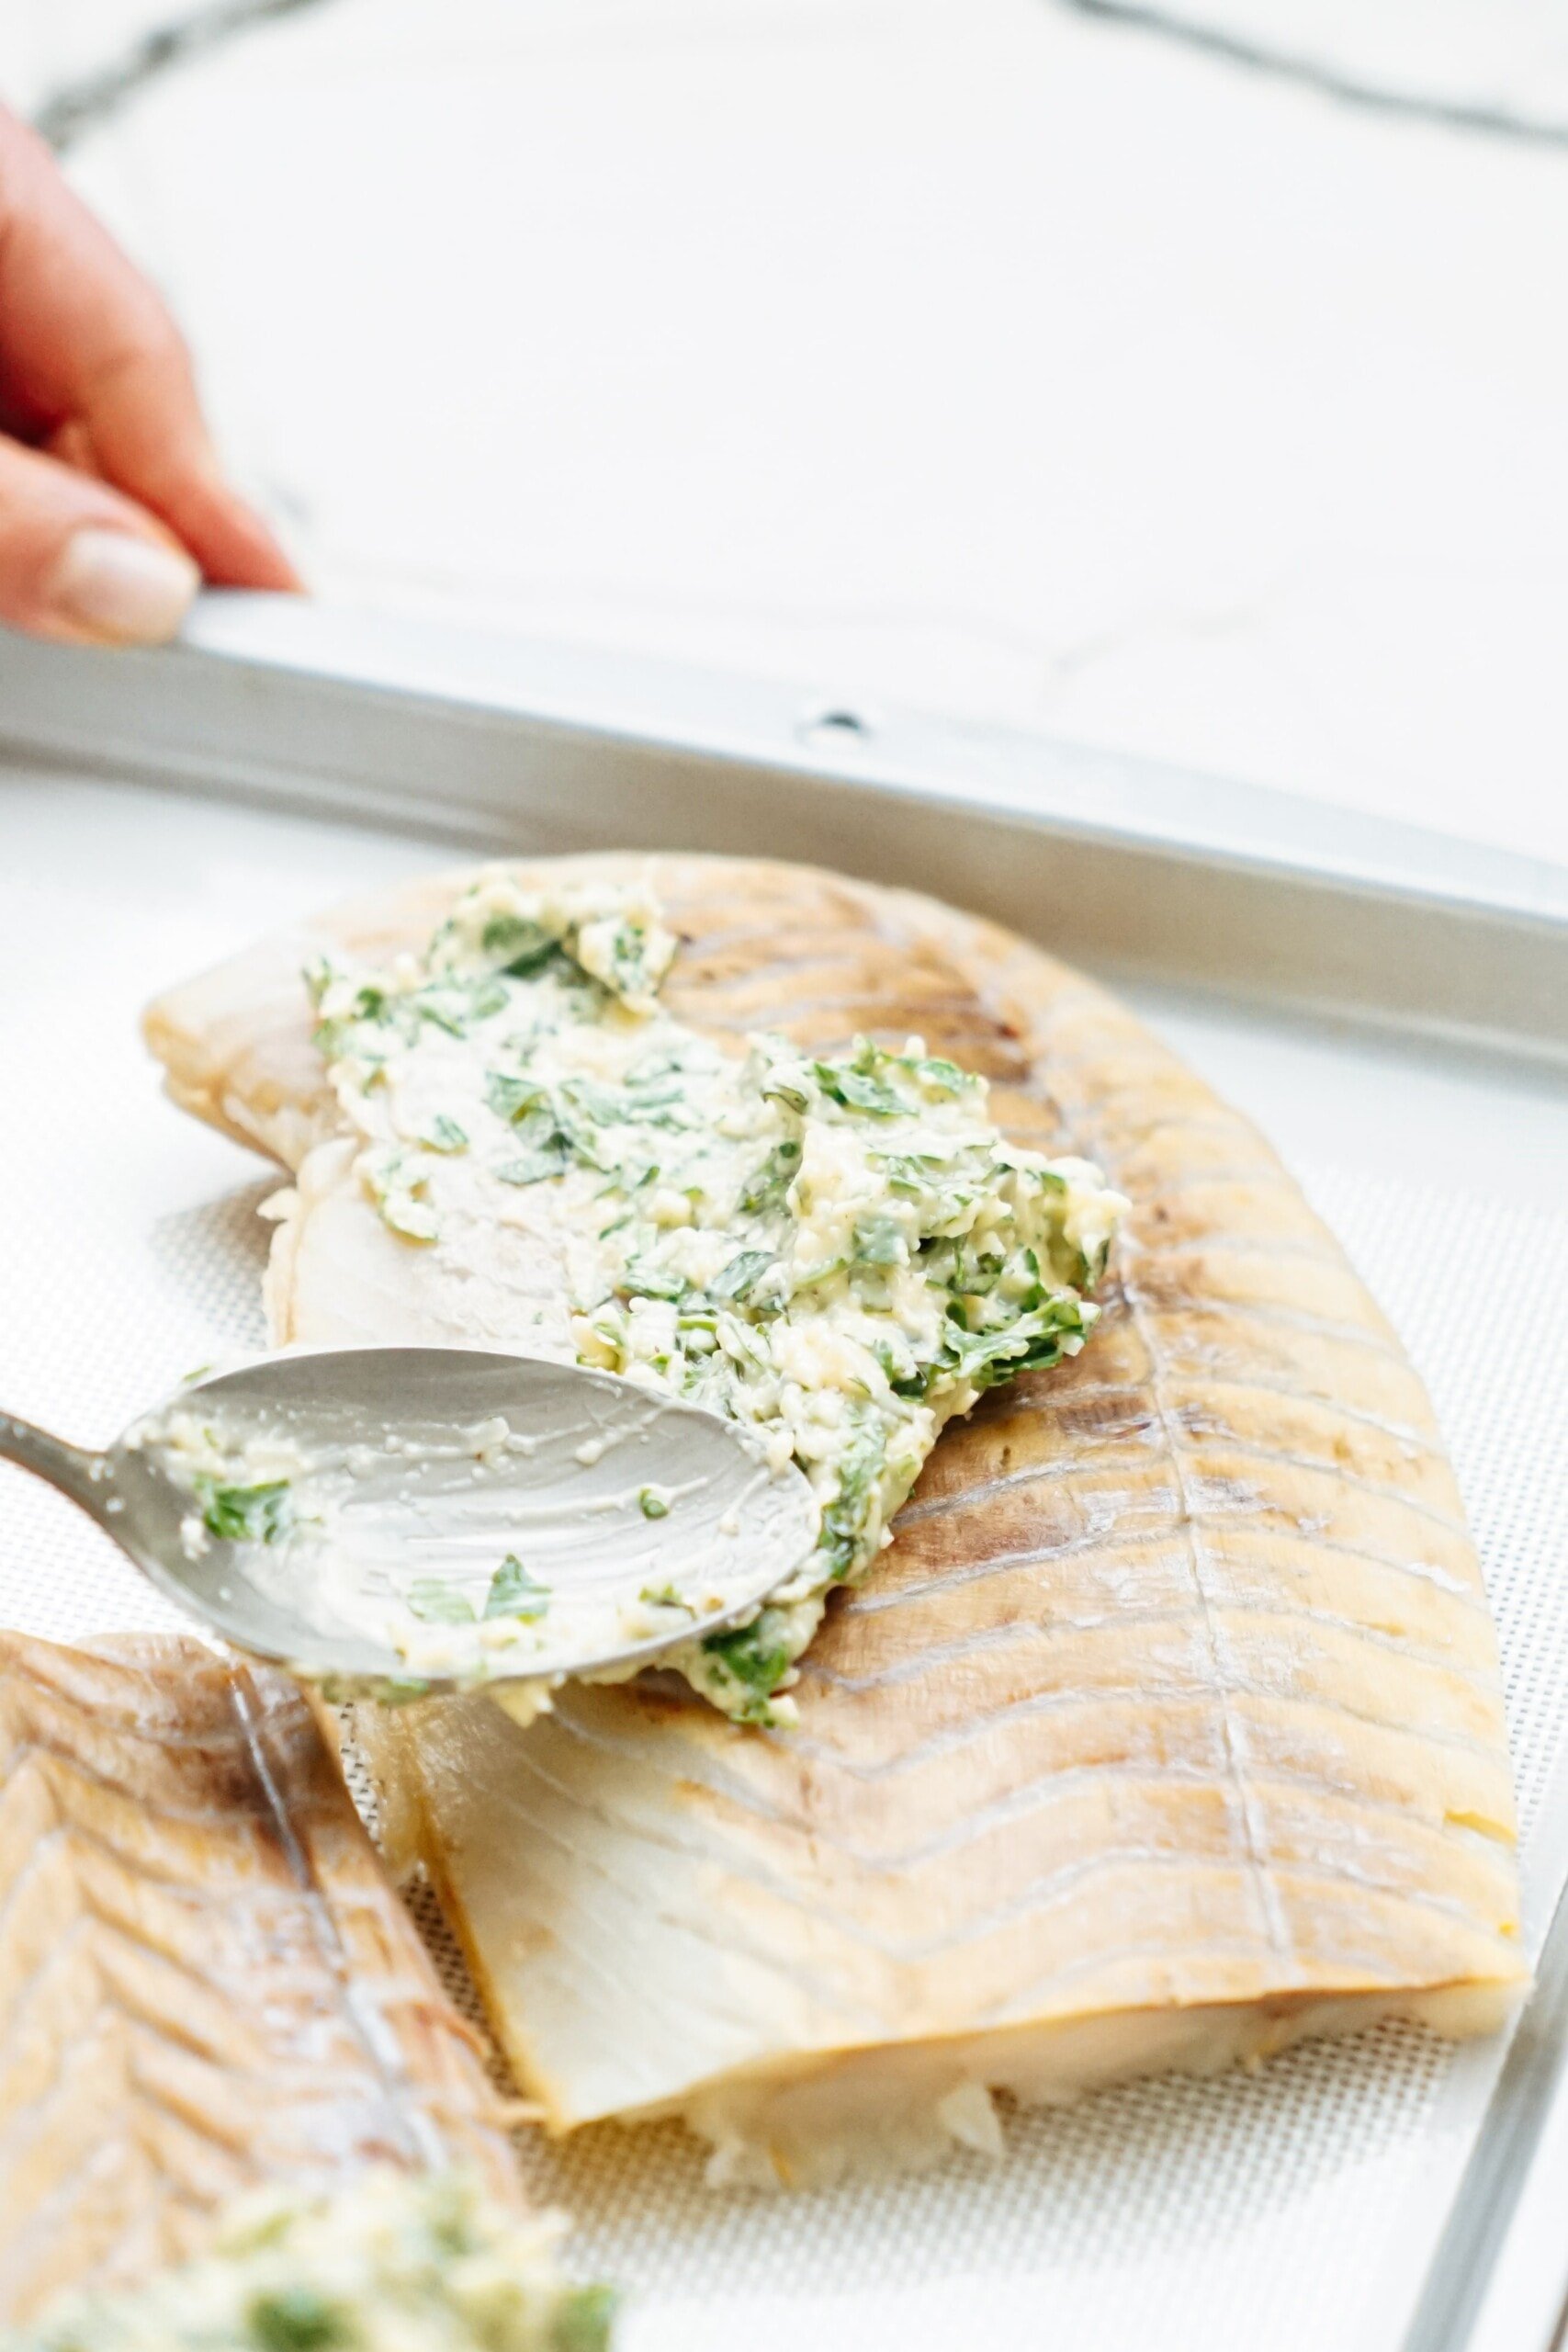 spoon smearing parmesan herb mixture over fish fillets